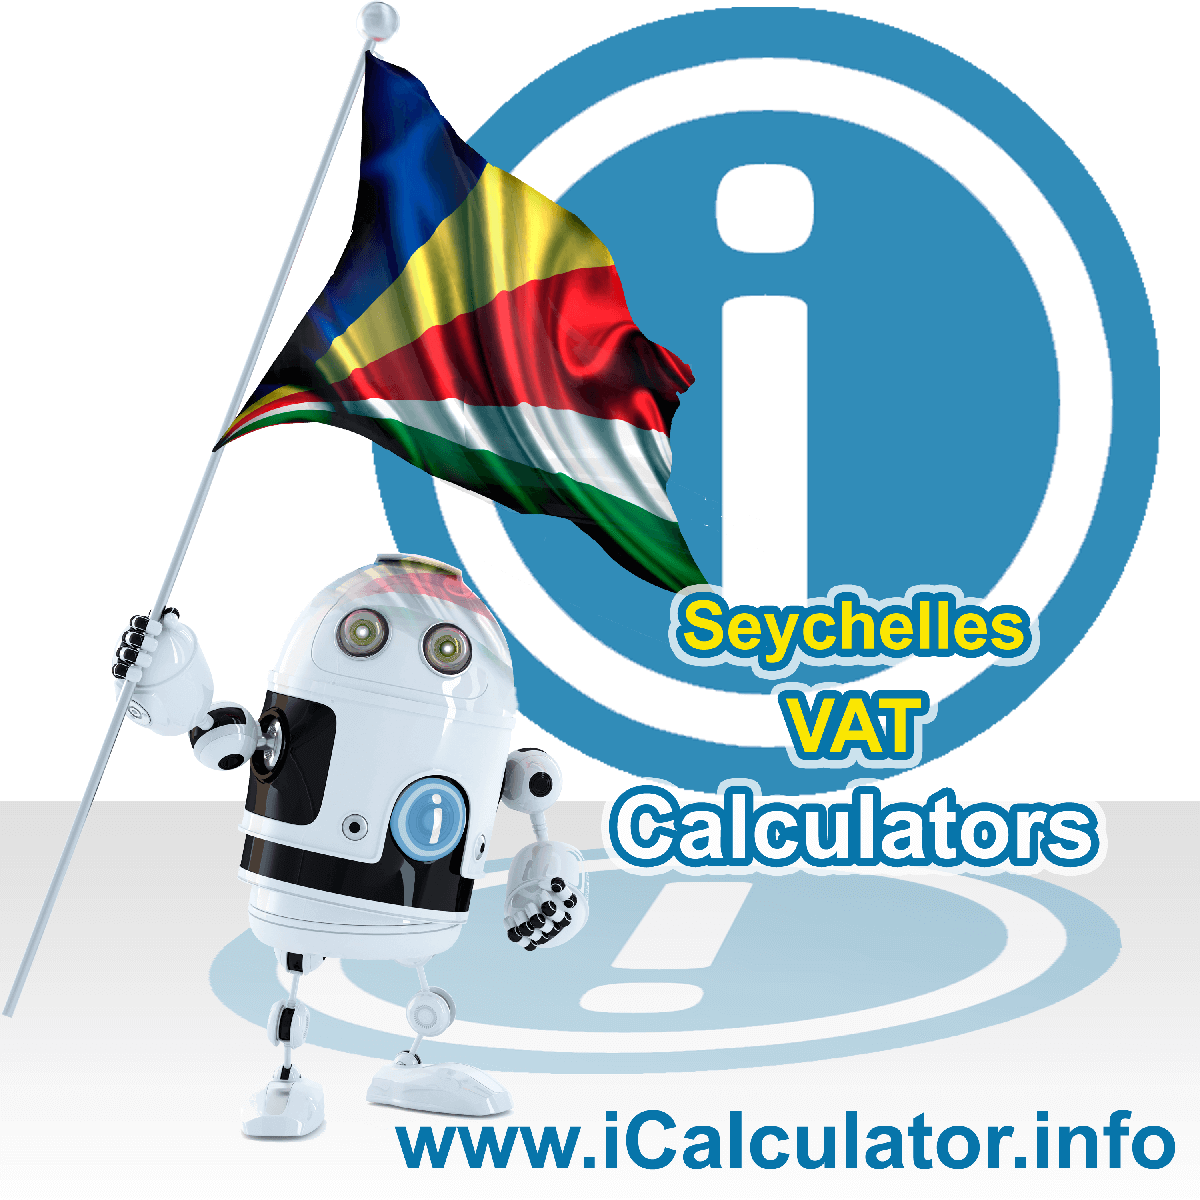 Seychelles VAT Calculator. This image shows the Seychelles flag and information relating to the VAT formula used for calculating Value Added Tax in Seychelles using the Seychelles VAT Calculator in 2023